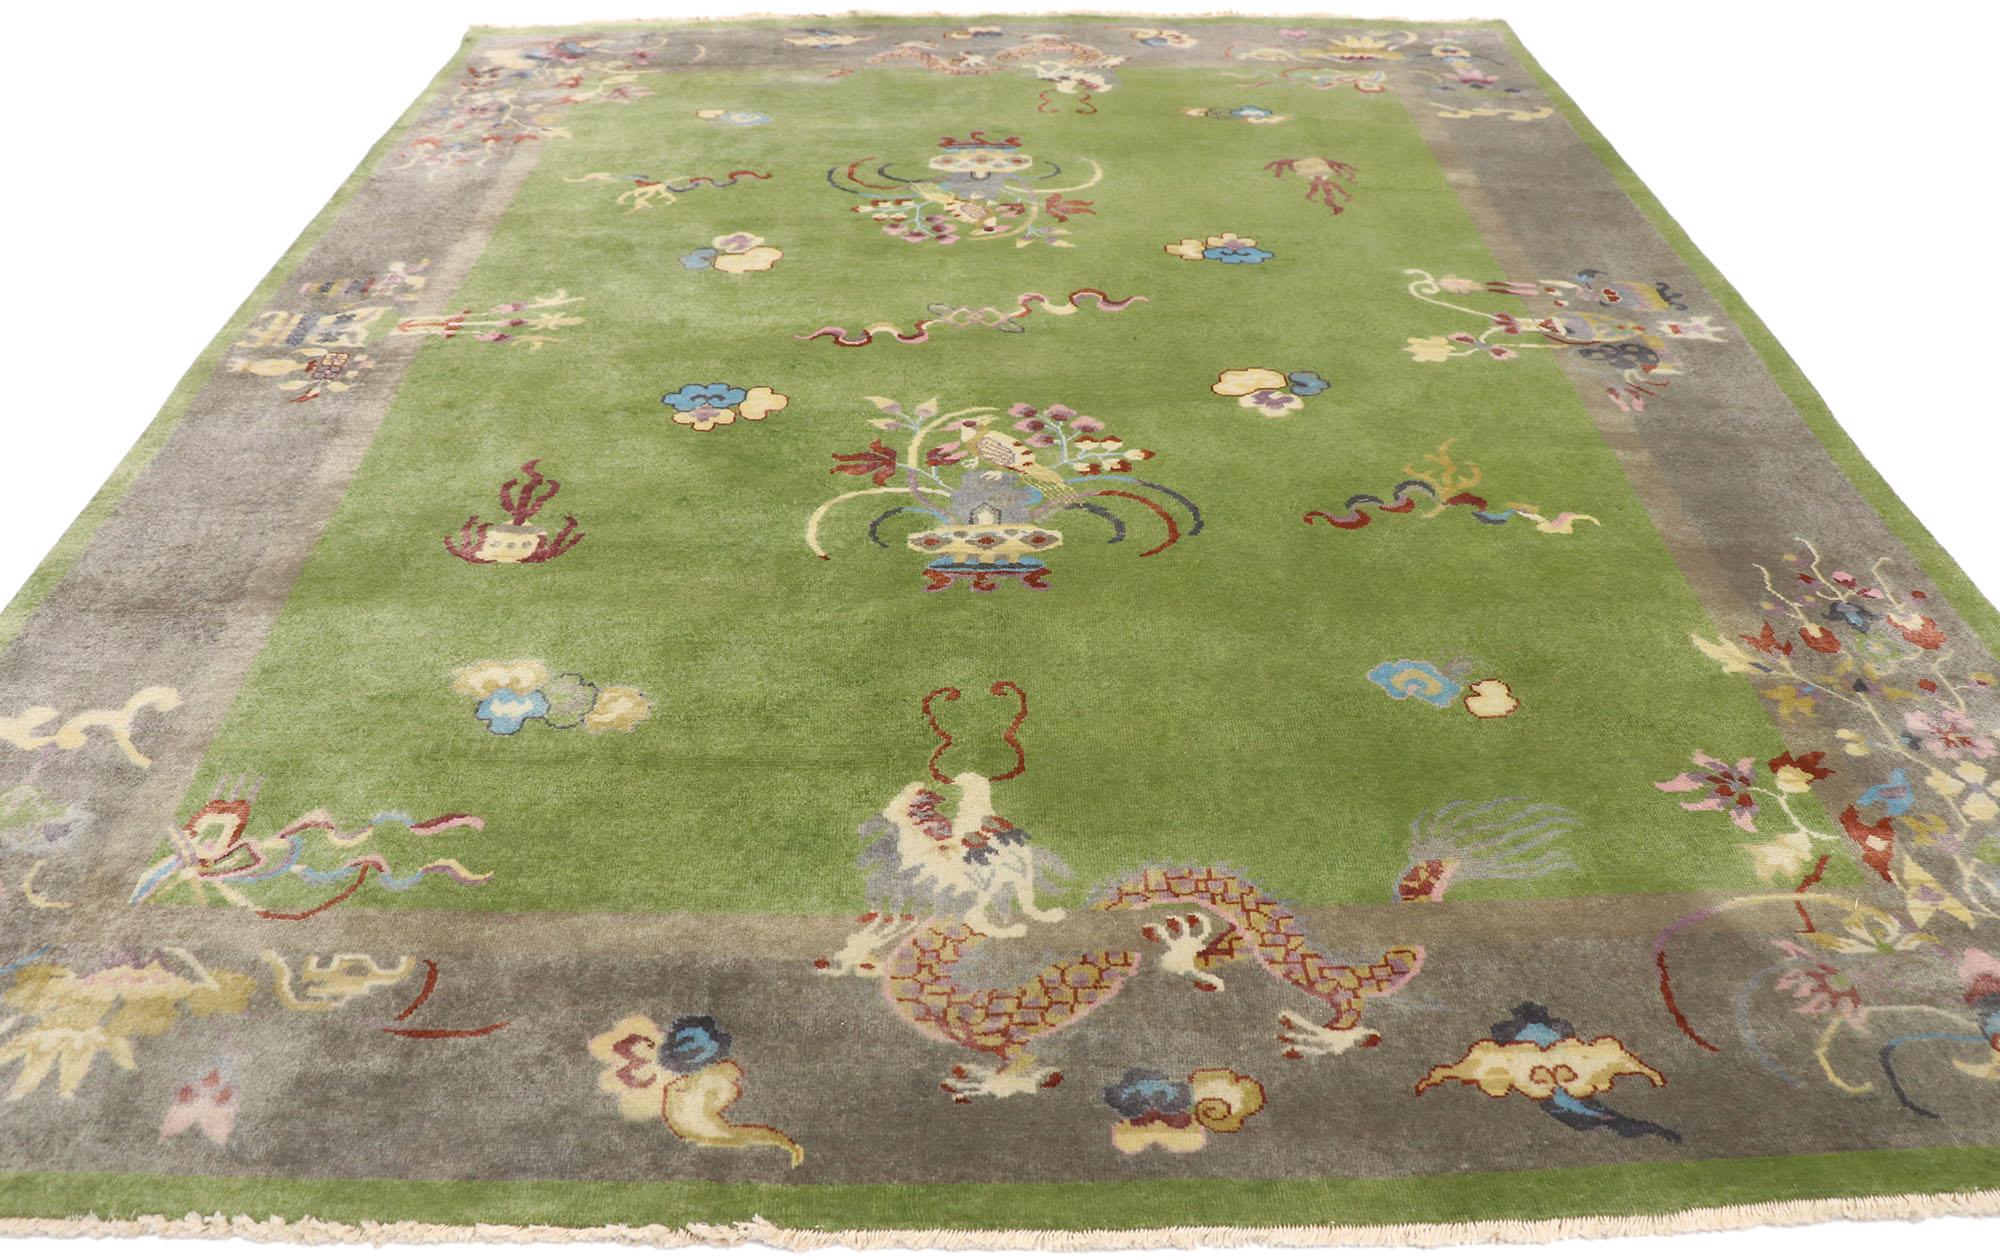 Indian New Contemporary Chinese Art Deco Style Pictorial Dragon Rug